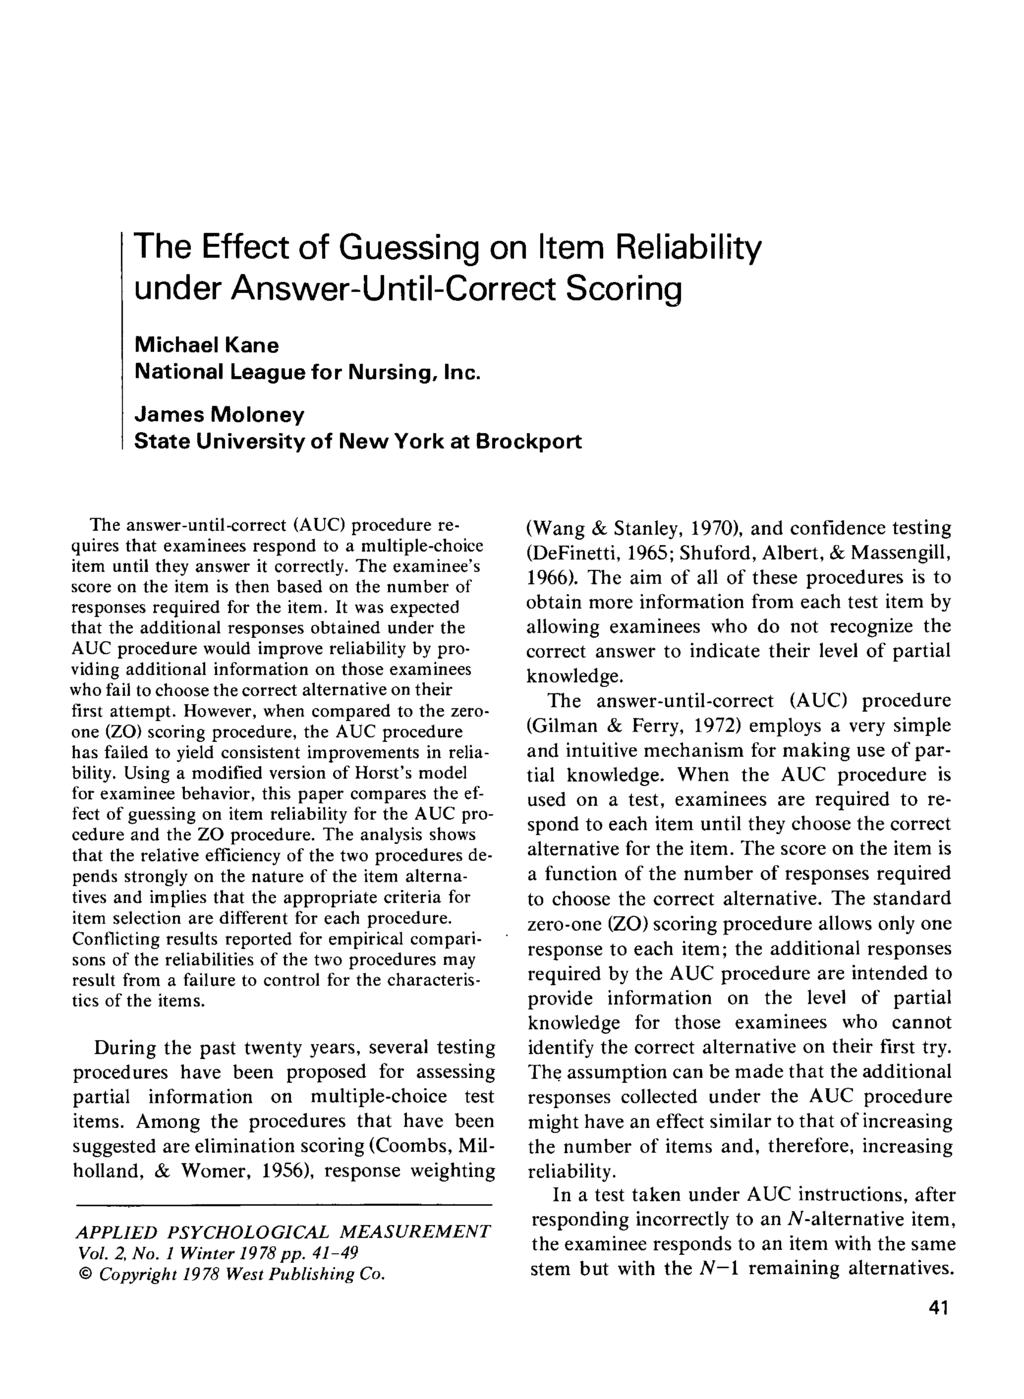 The Effect of Guessing on Item Reliability under Answer-Until-Correct Scoring Michael Kane National League for Nursing, Inc.